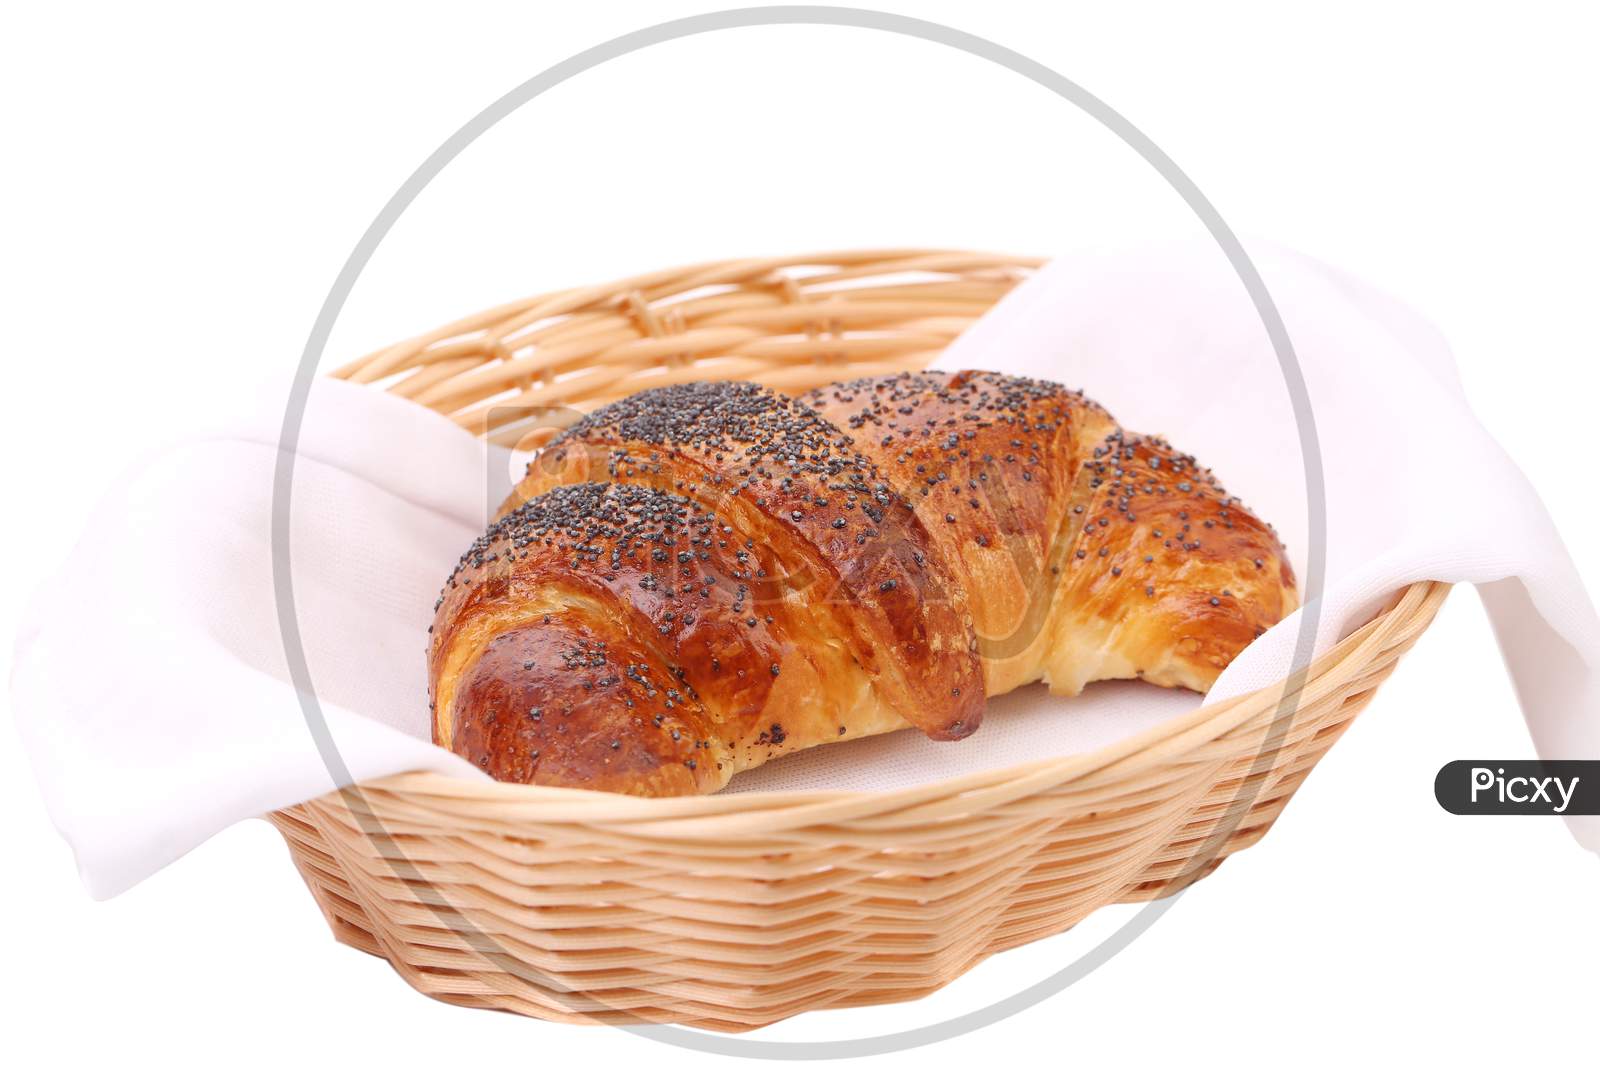 Image Of Croissant With Poppy In A Basket. Isolated On A White Background.